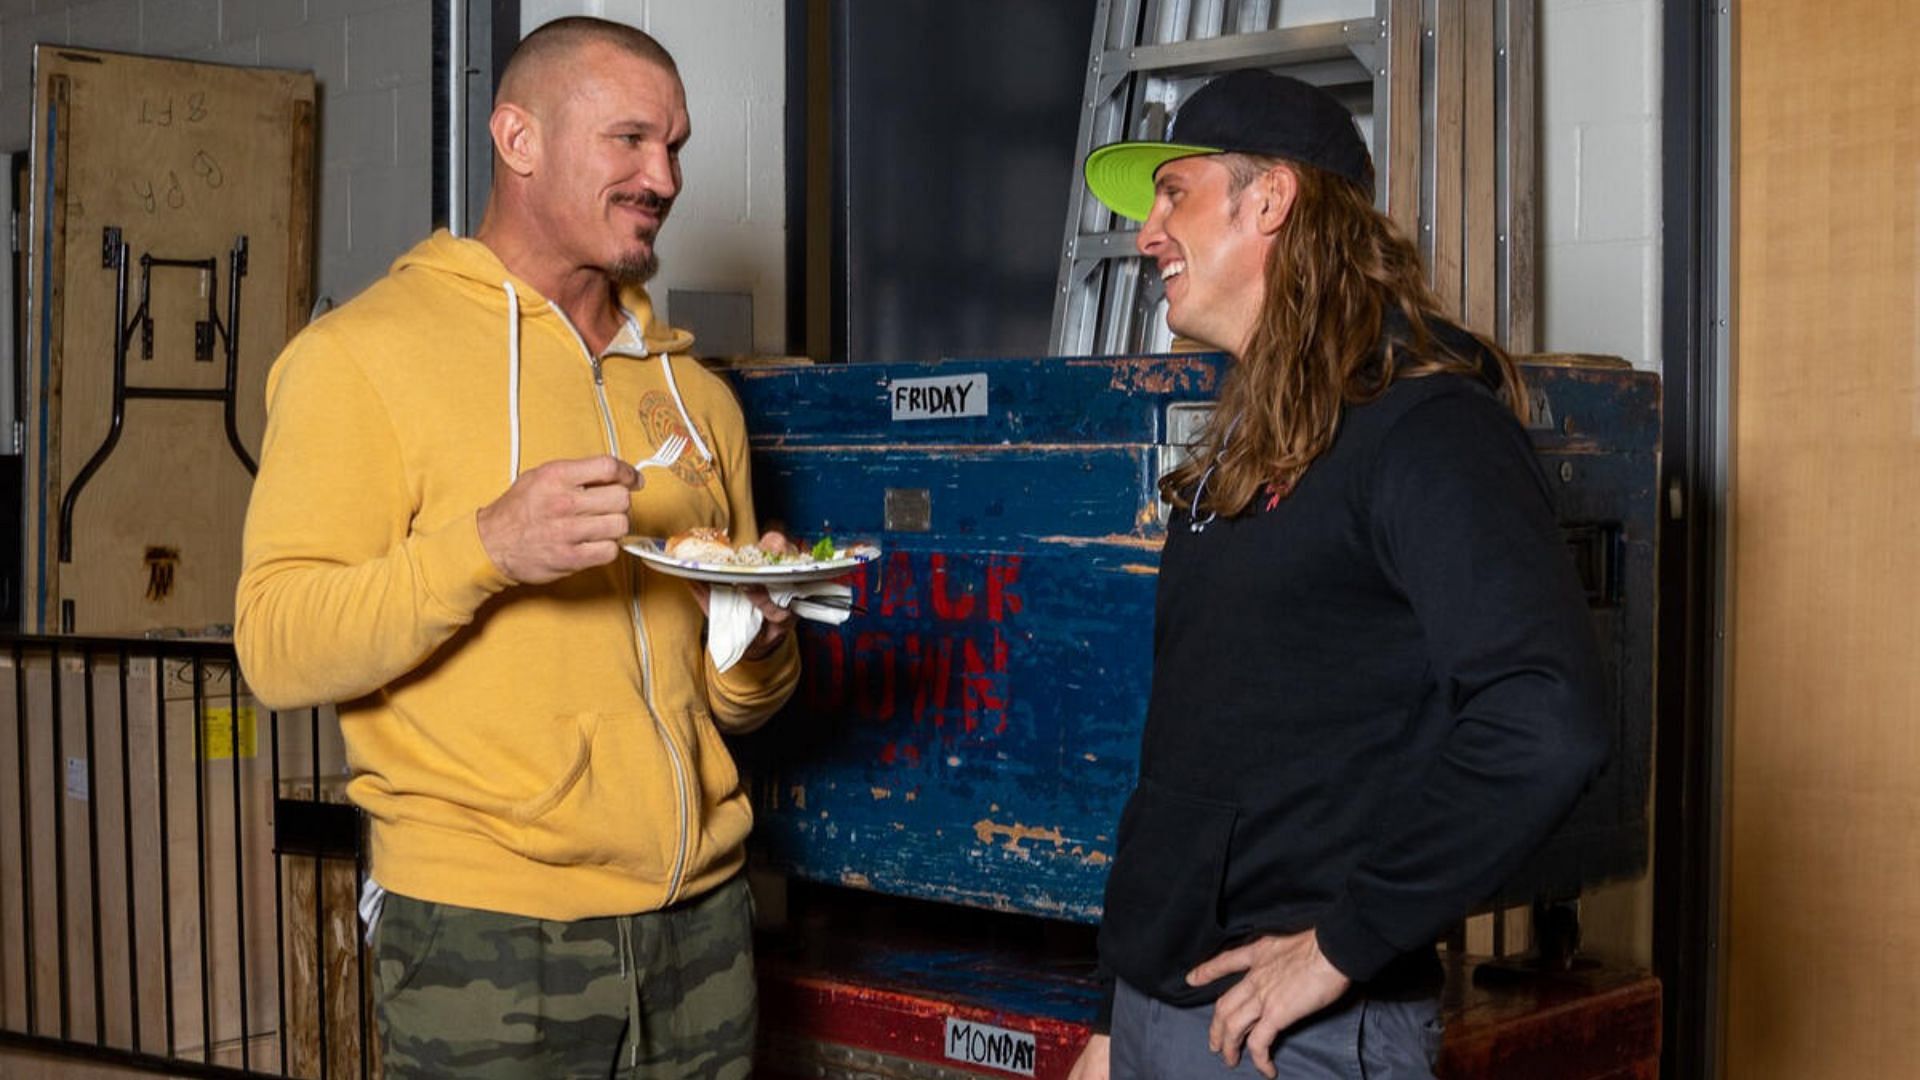 Randy Orton and Matt Riddle sharing a candid backstage moment.